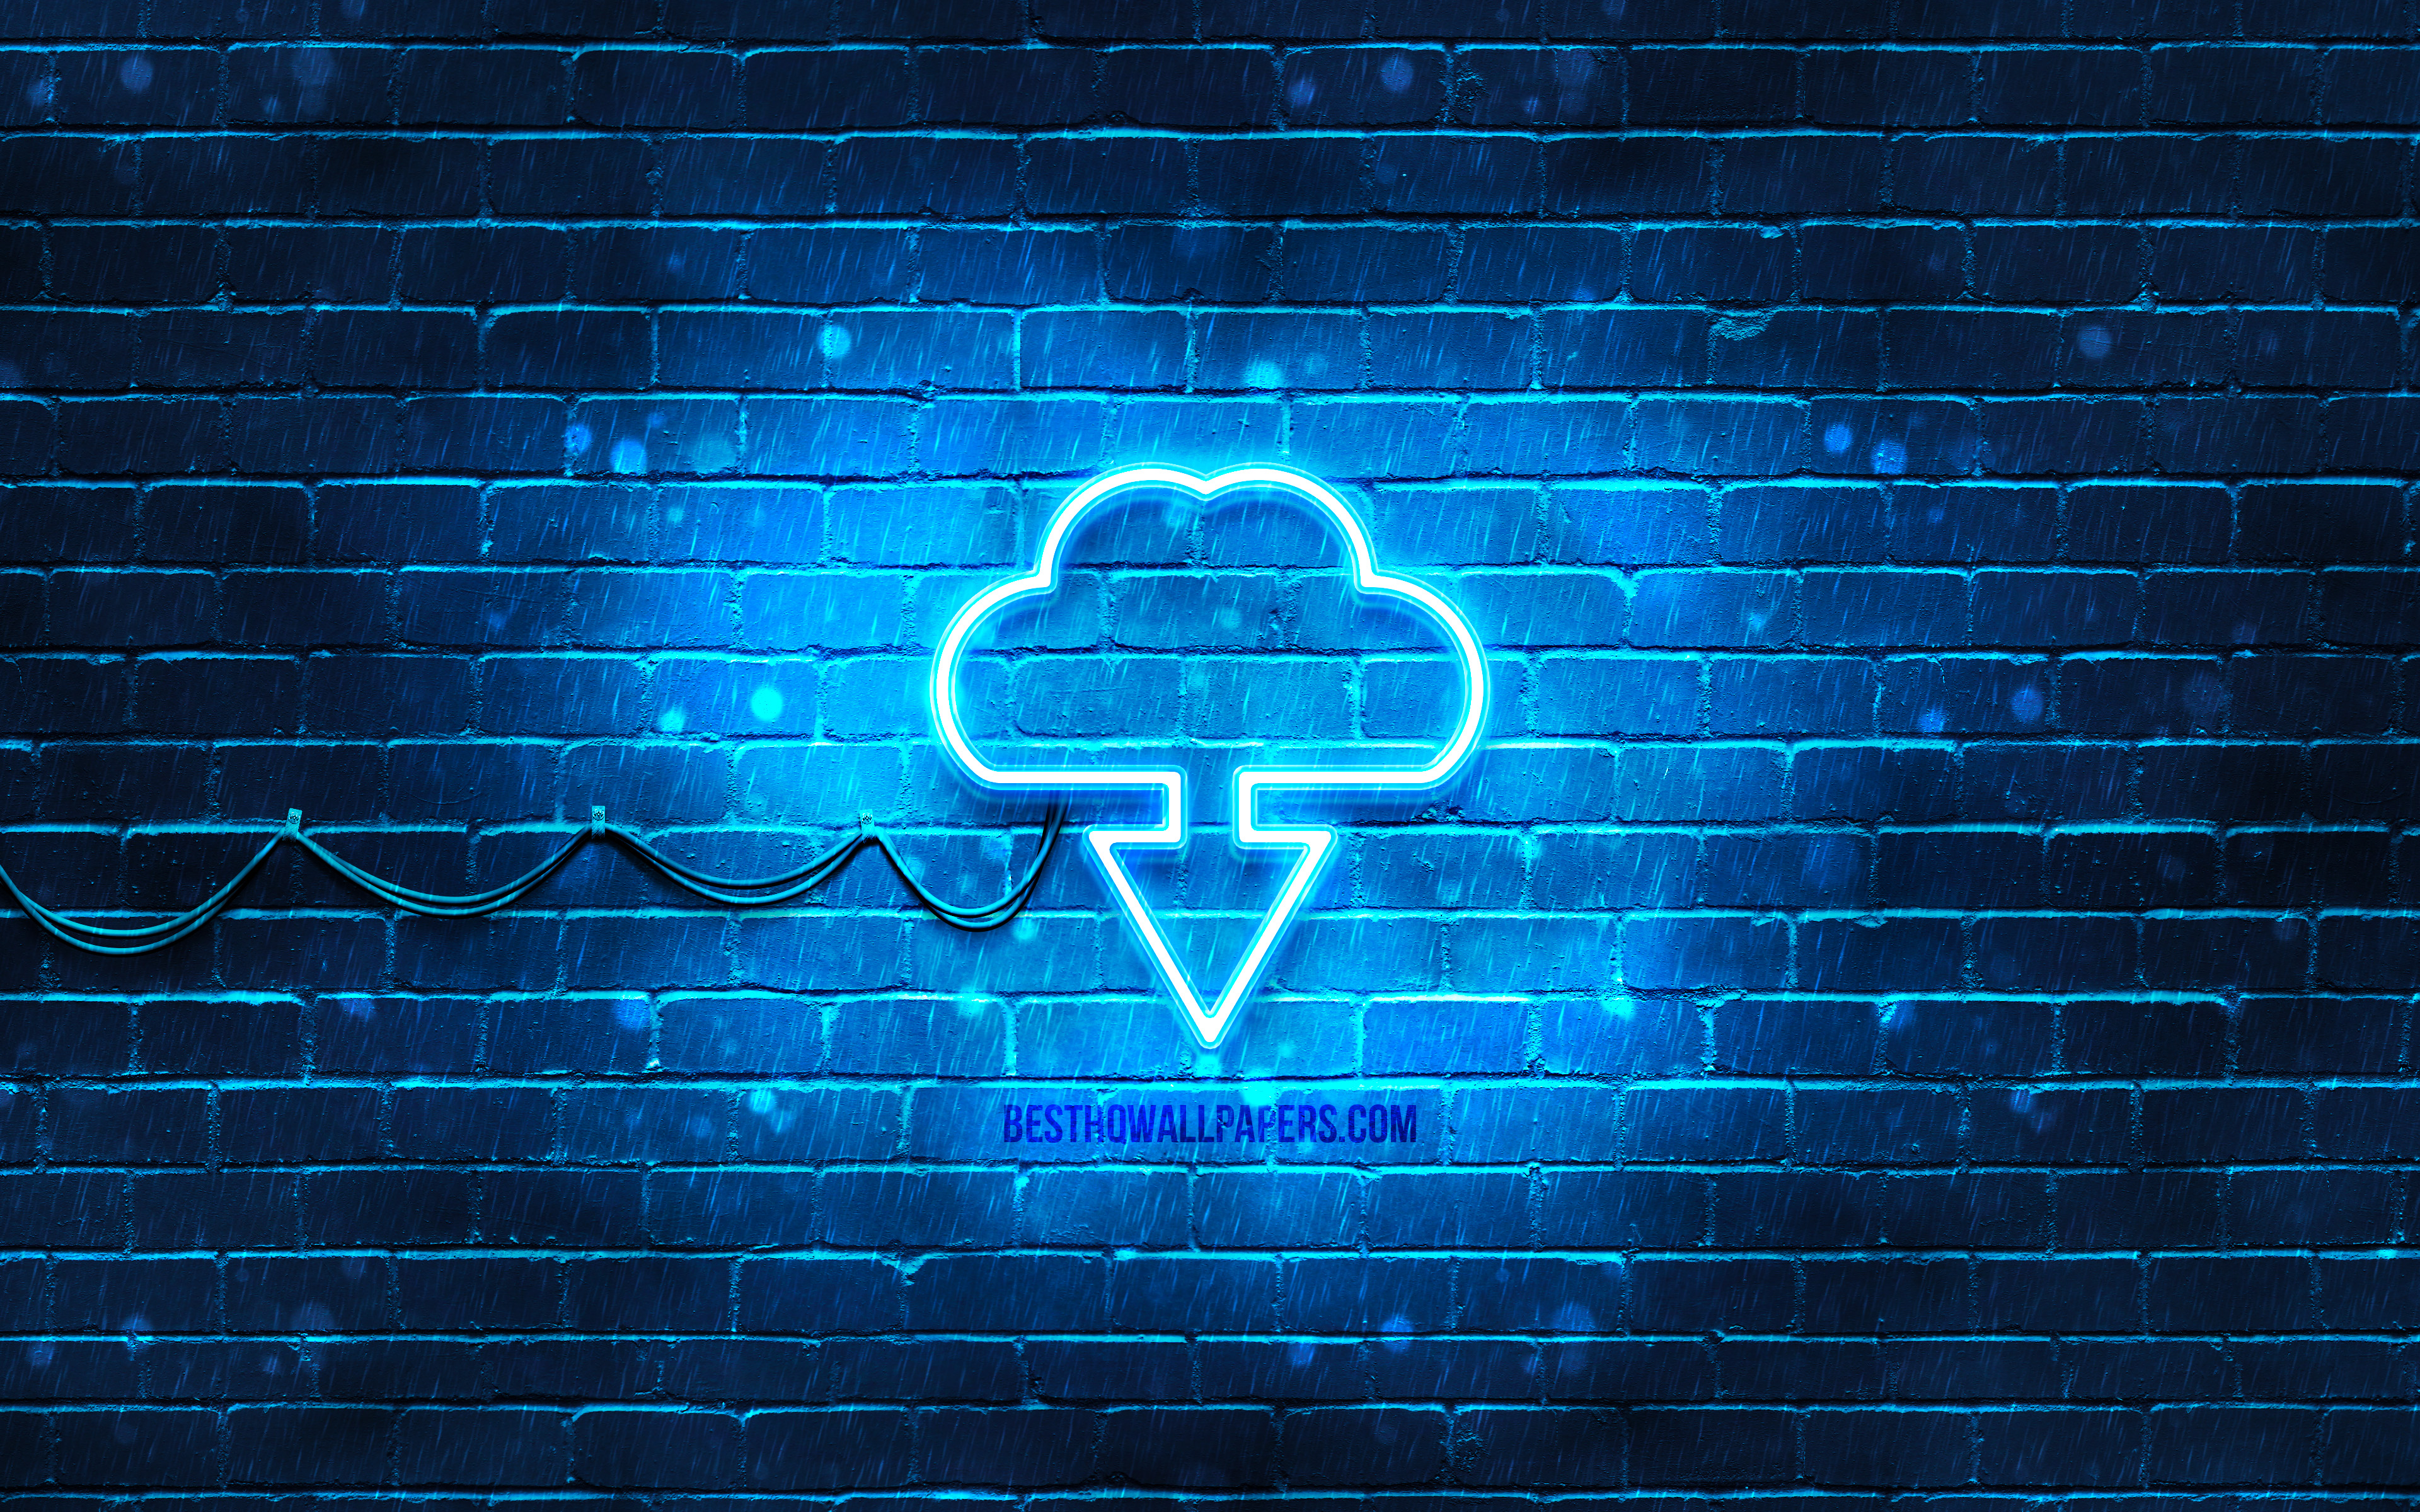 Download wallpaper Cloud Download neon icon, 4k, blue background, neon symbols, Cloud Download, neon icons, Cloud Download sign, computer signs, Cloud Download icon, computer icons for desktop with resolution 3840x2400. High Quality